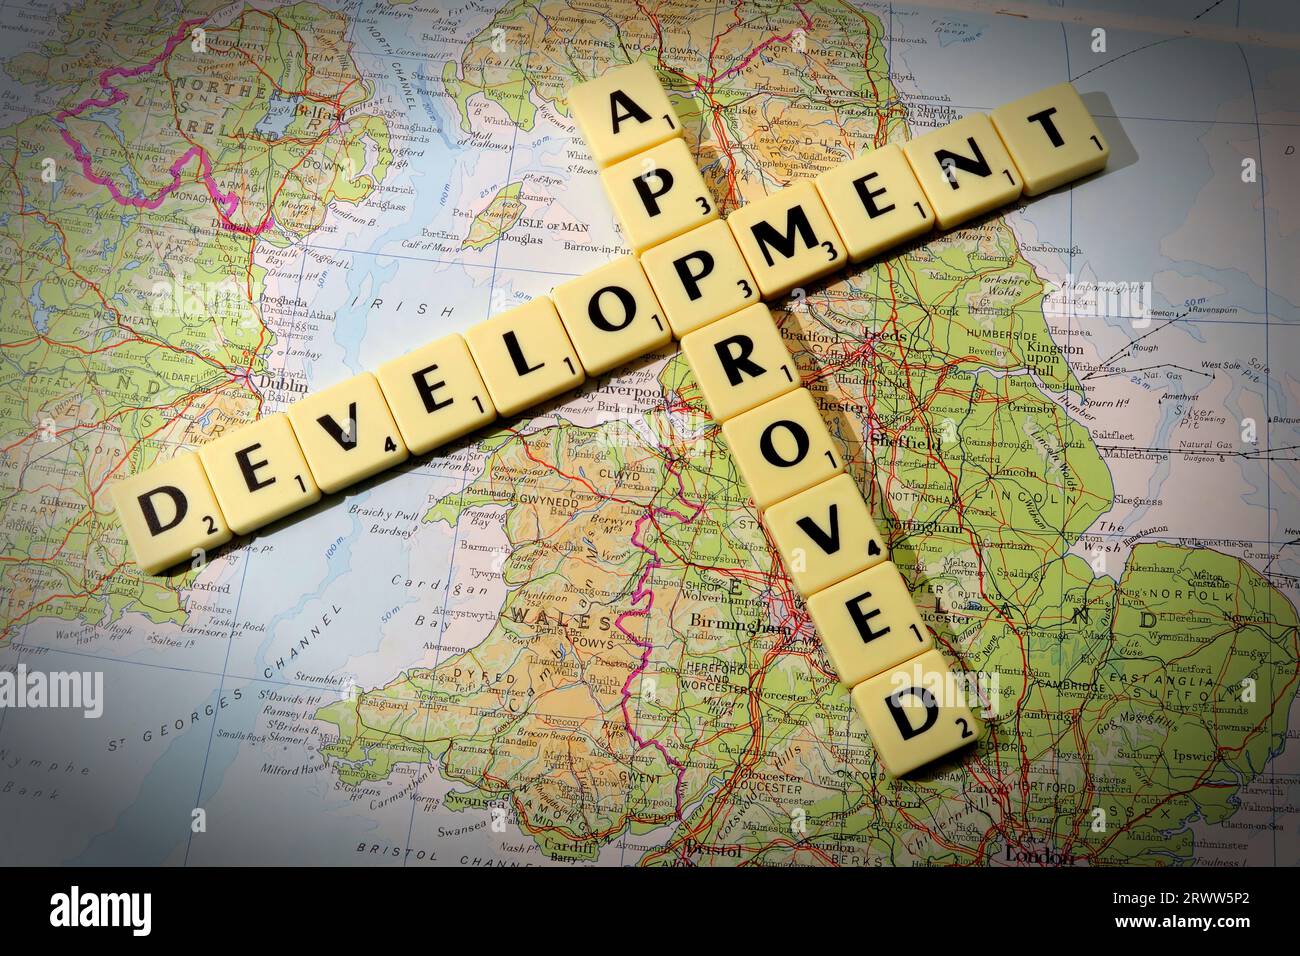 Development Approved spelled out in Scrabble letters and words on a map of England - local development and building control Stock Photo